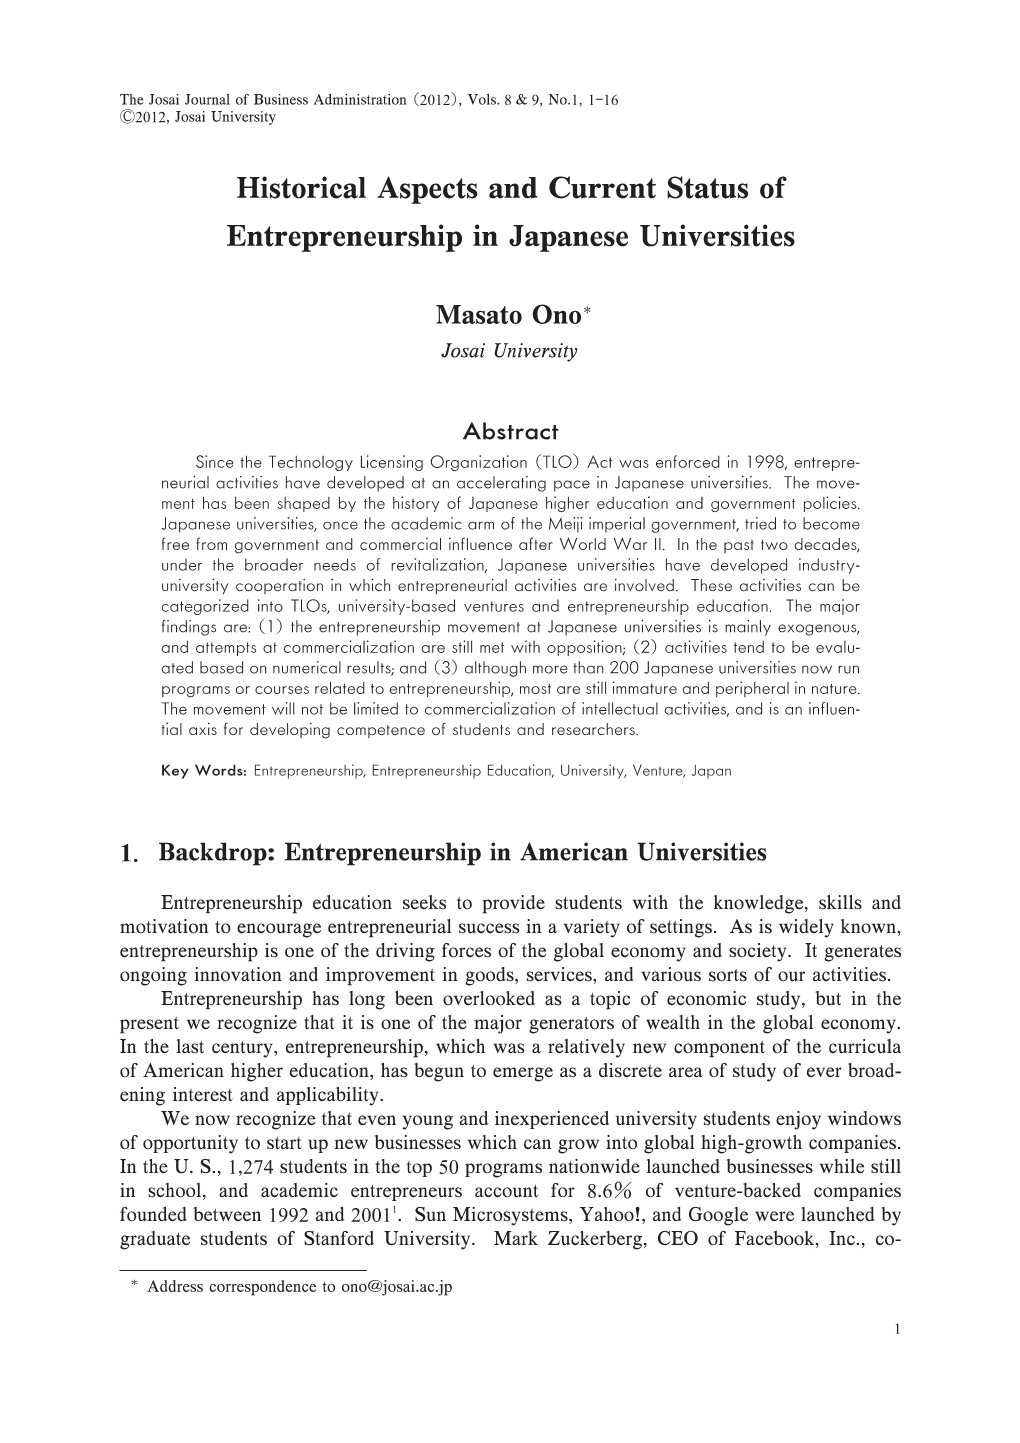 How Is Entrepreneurship Being Taught in Japanese Universities?